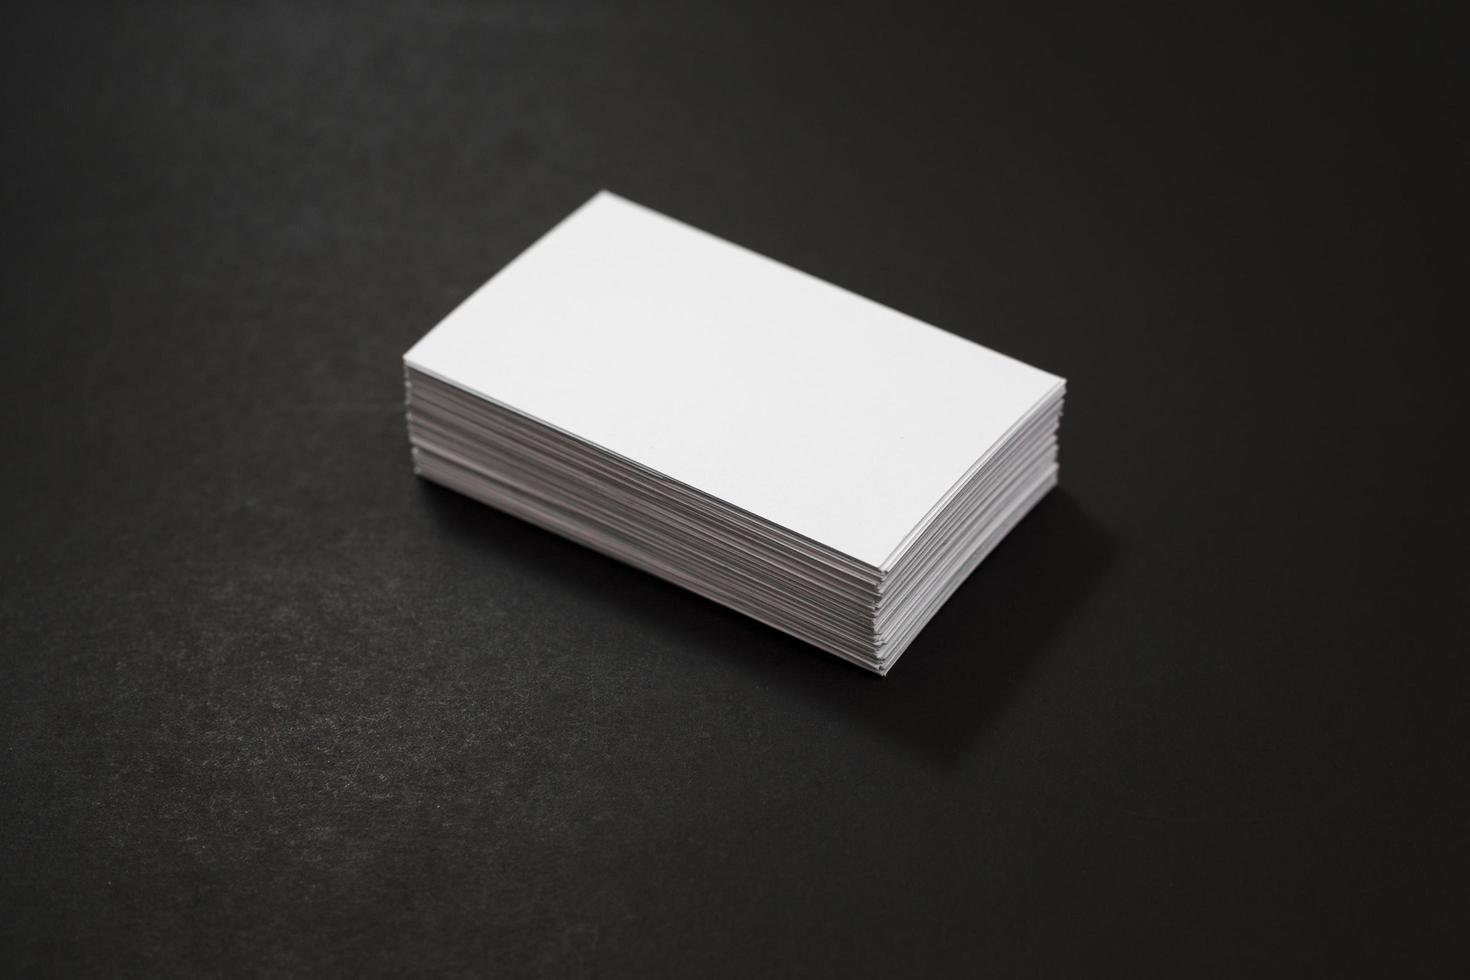 Blank business cards stack up on black background photo